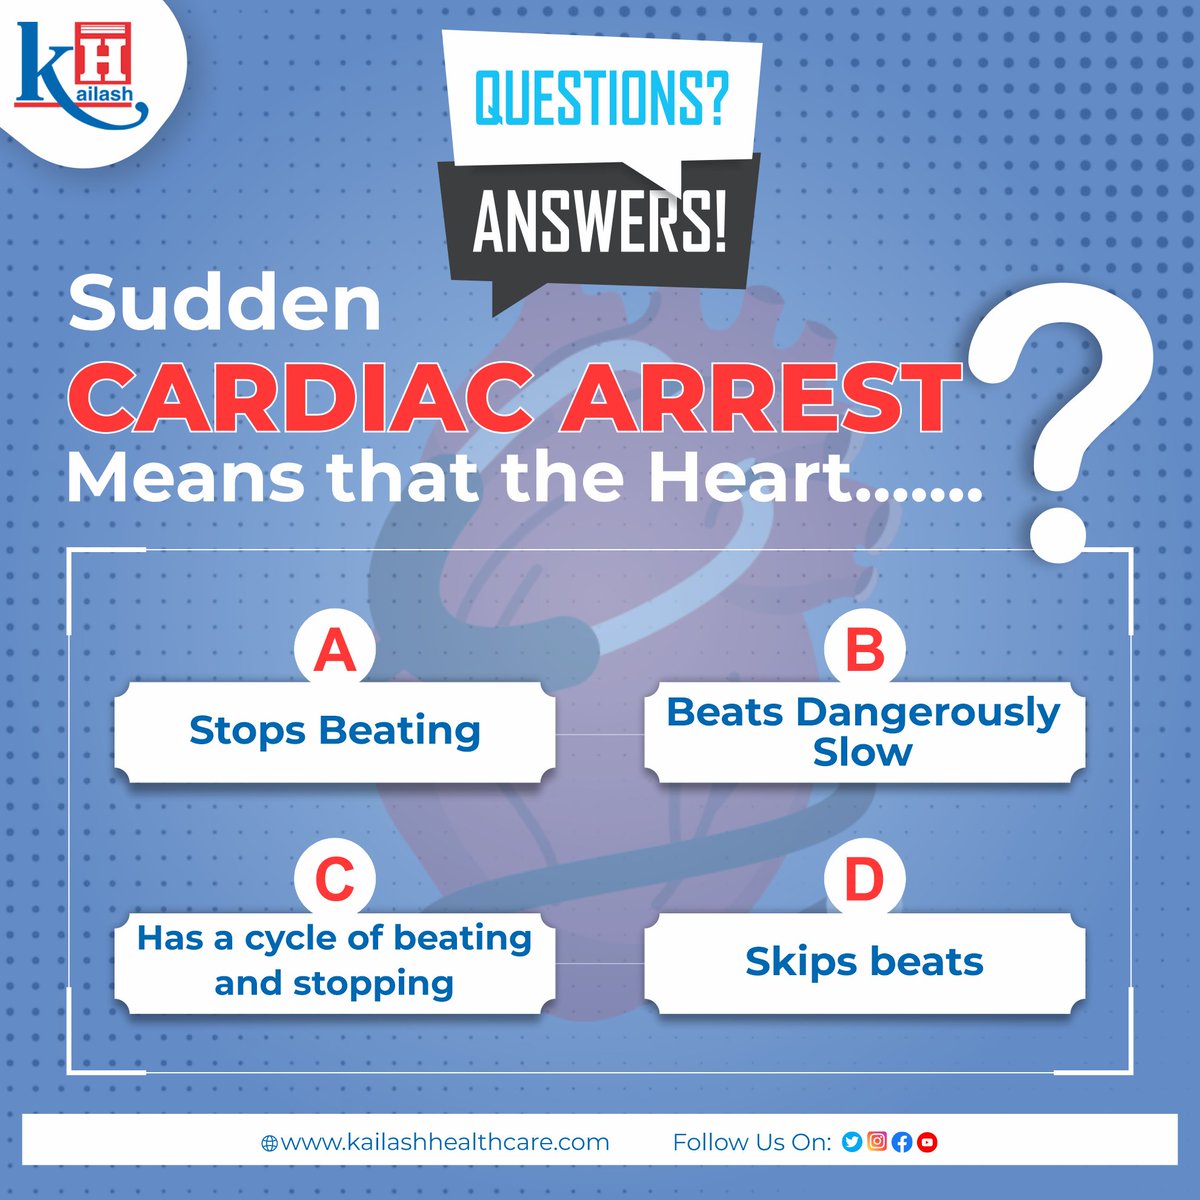 What does a Sudden Cardiac Arrest seem like? Think wisely and answer!
Share your answers in the comment below👇

#healthquest #Cardiacarrest